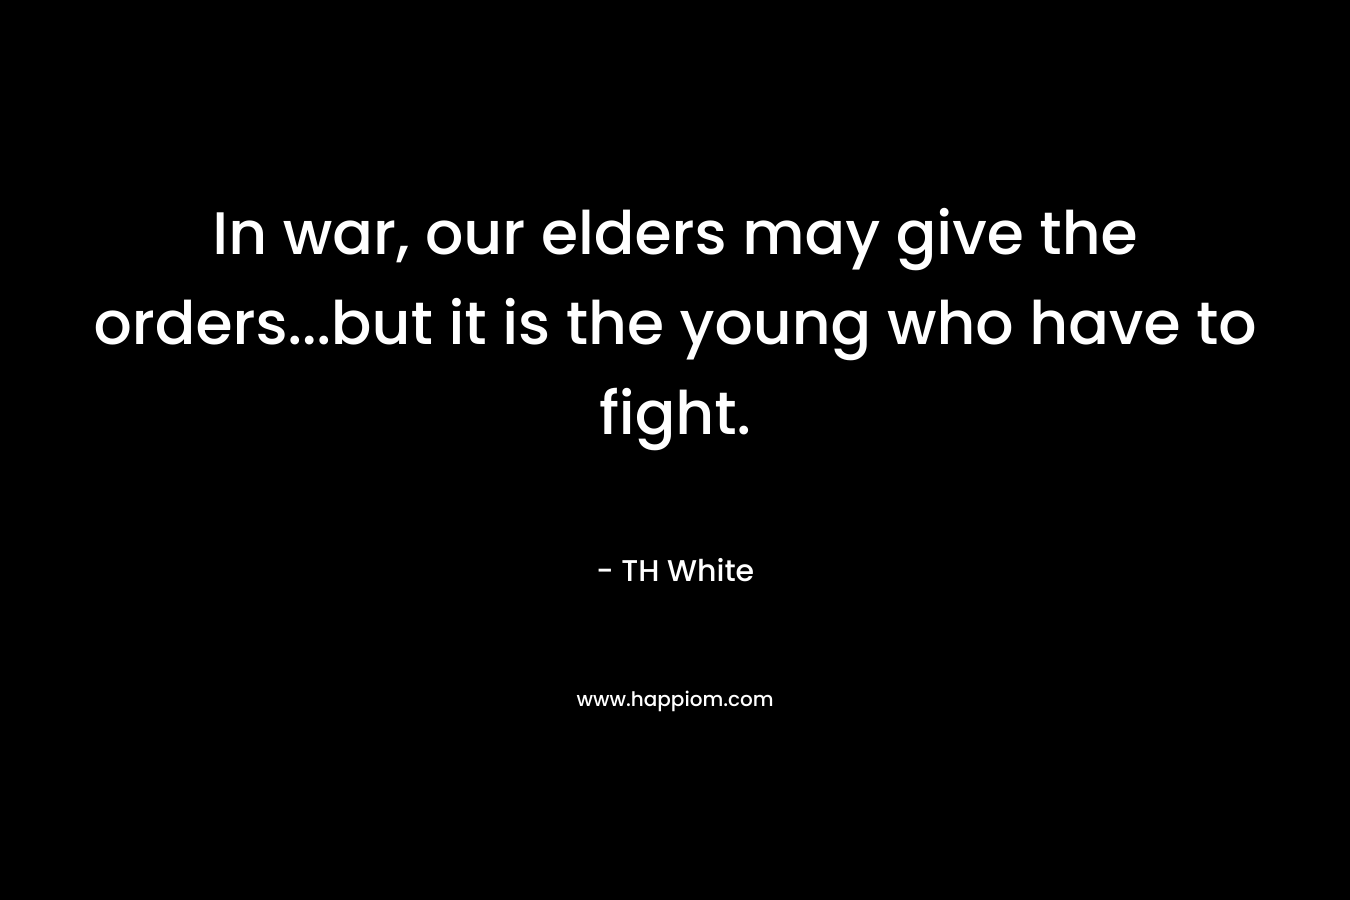 In war, our elders may give the orders...but it is the young who have to fight.